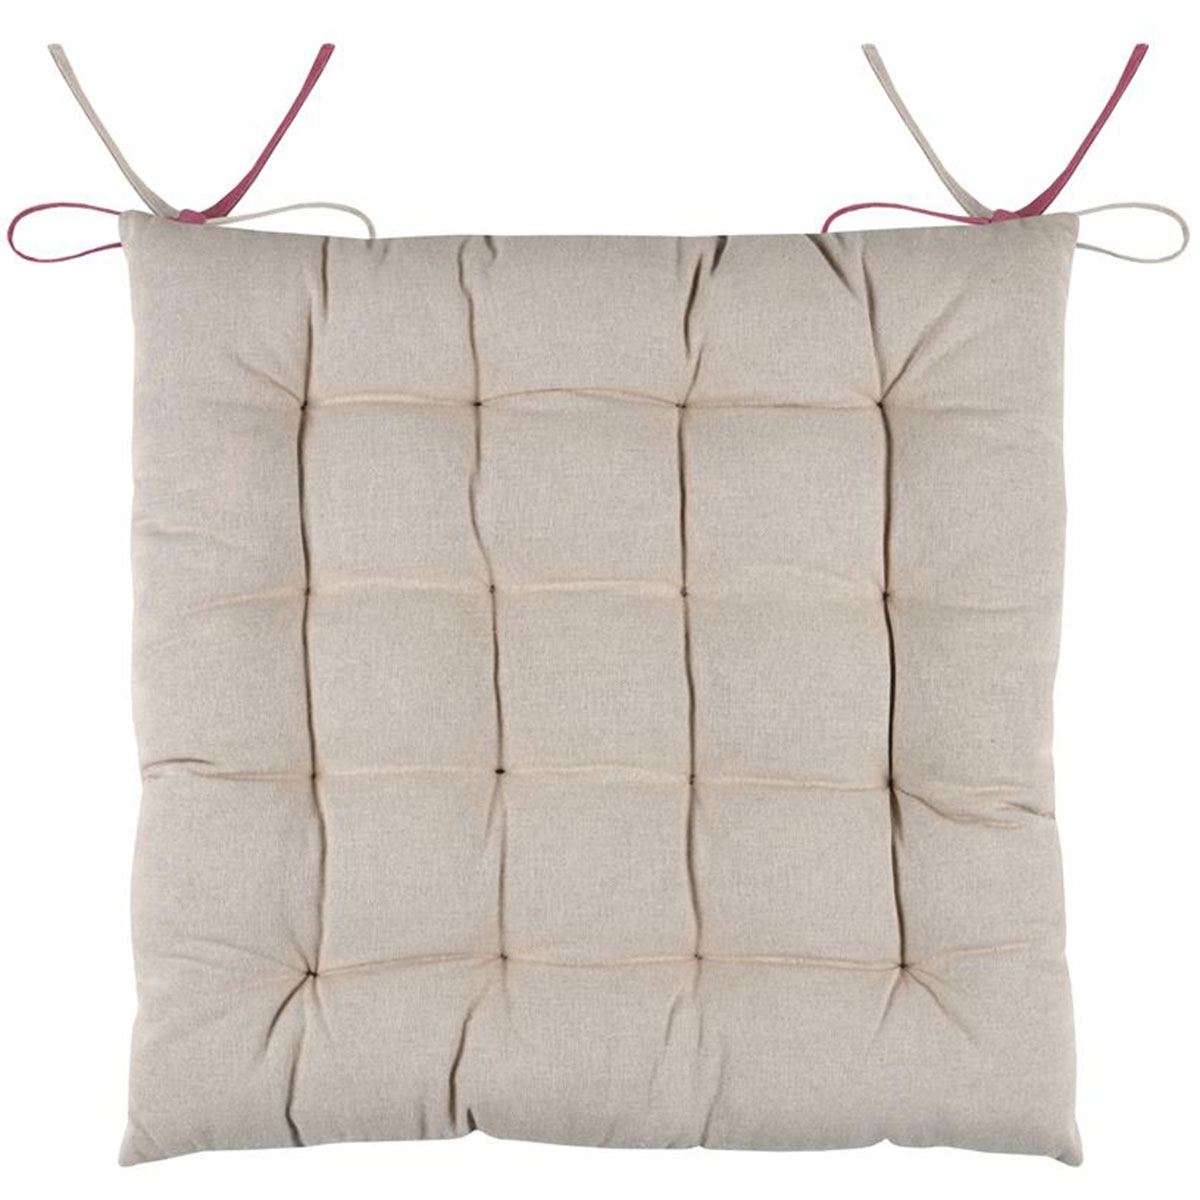 Reversible two-tone chair cushion in cotton - Pink and Linen